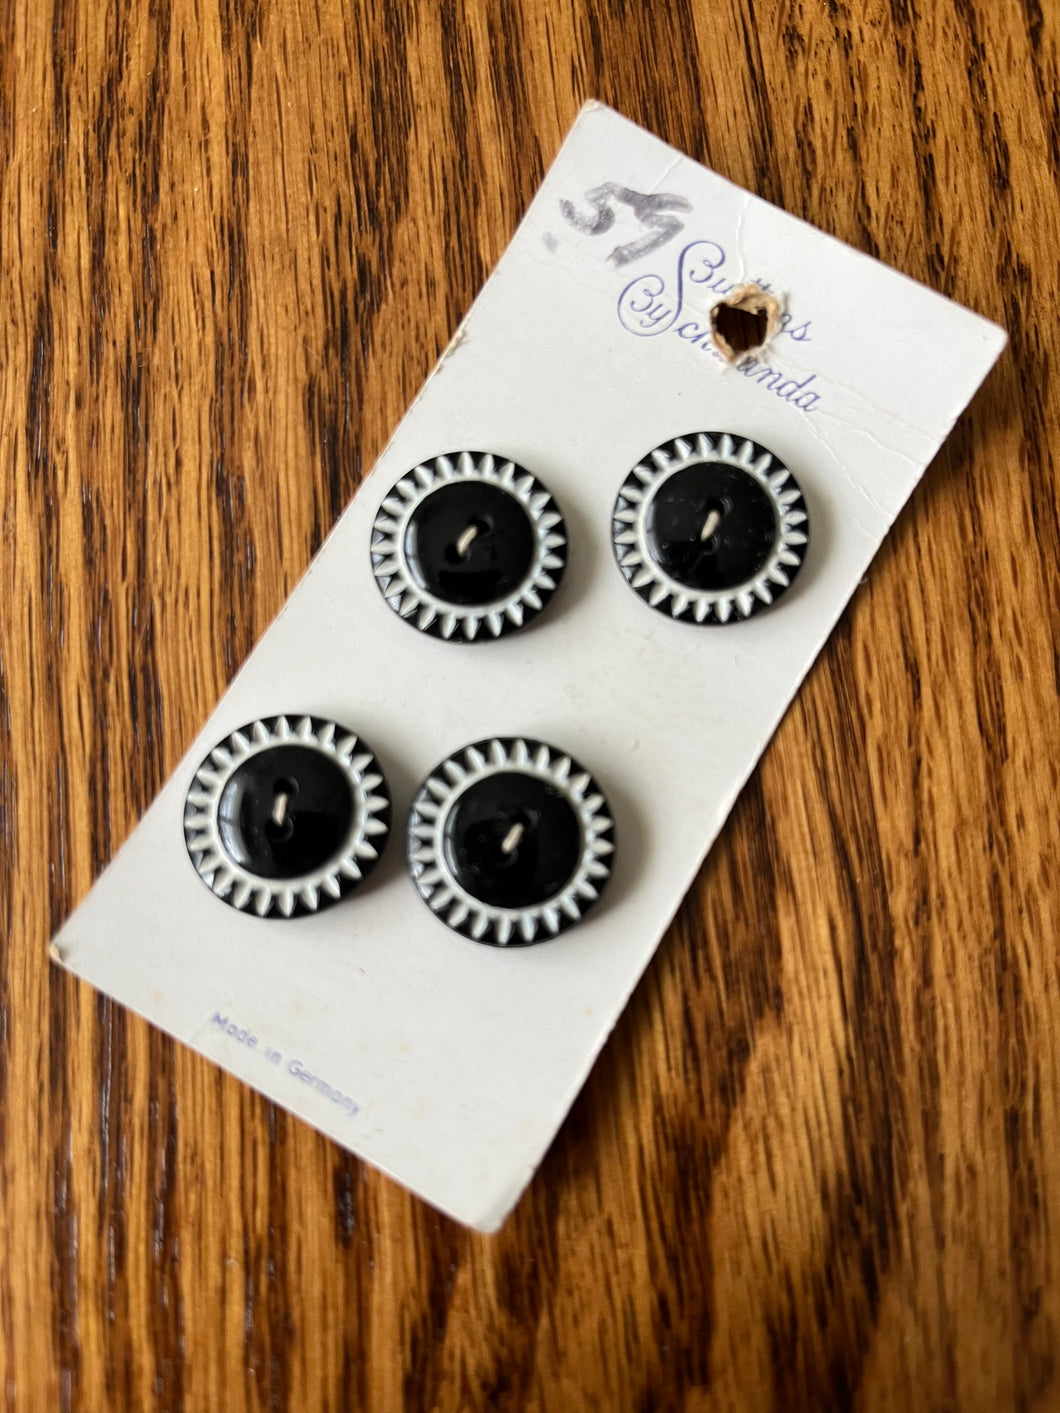 1960’s Buttons by Schwanda Plastic Buttons - Black and White - Set of 5 - 3/4” -  on card